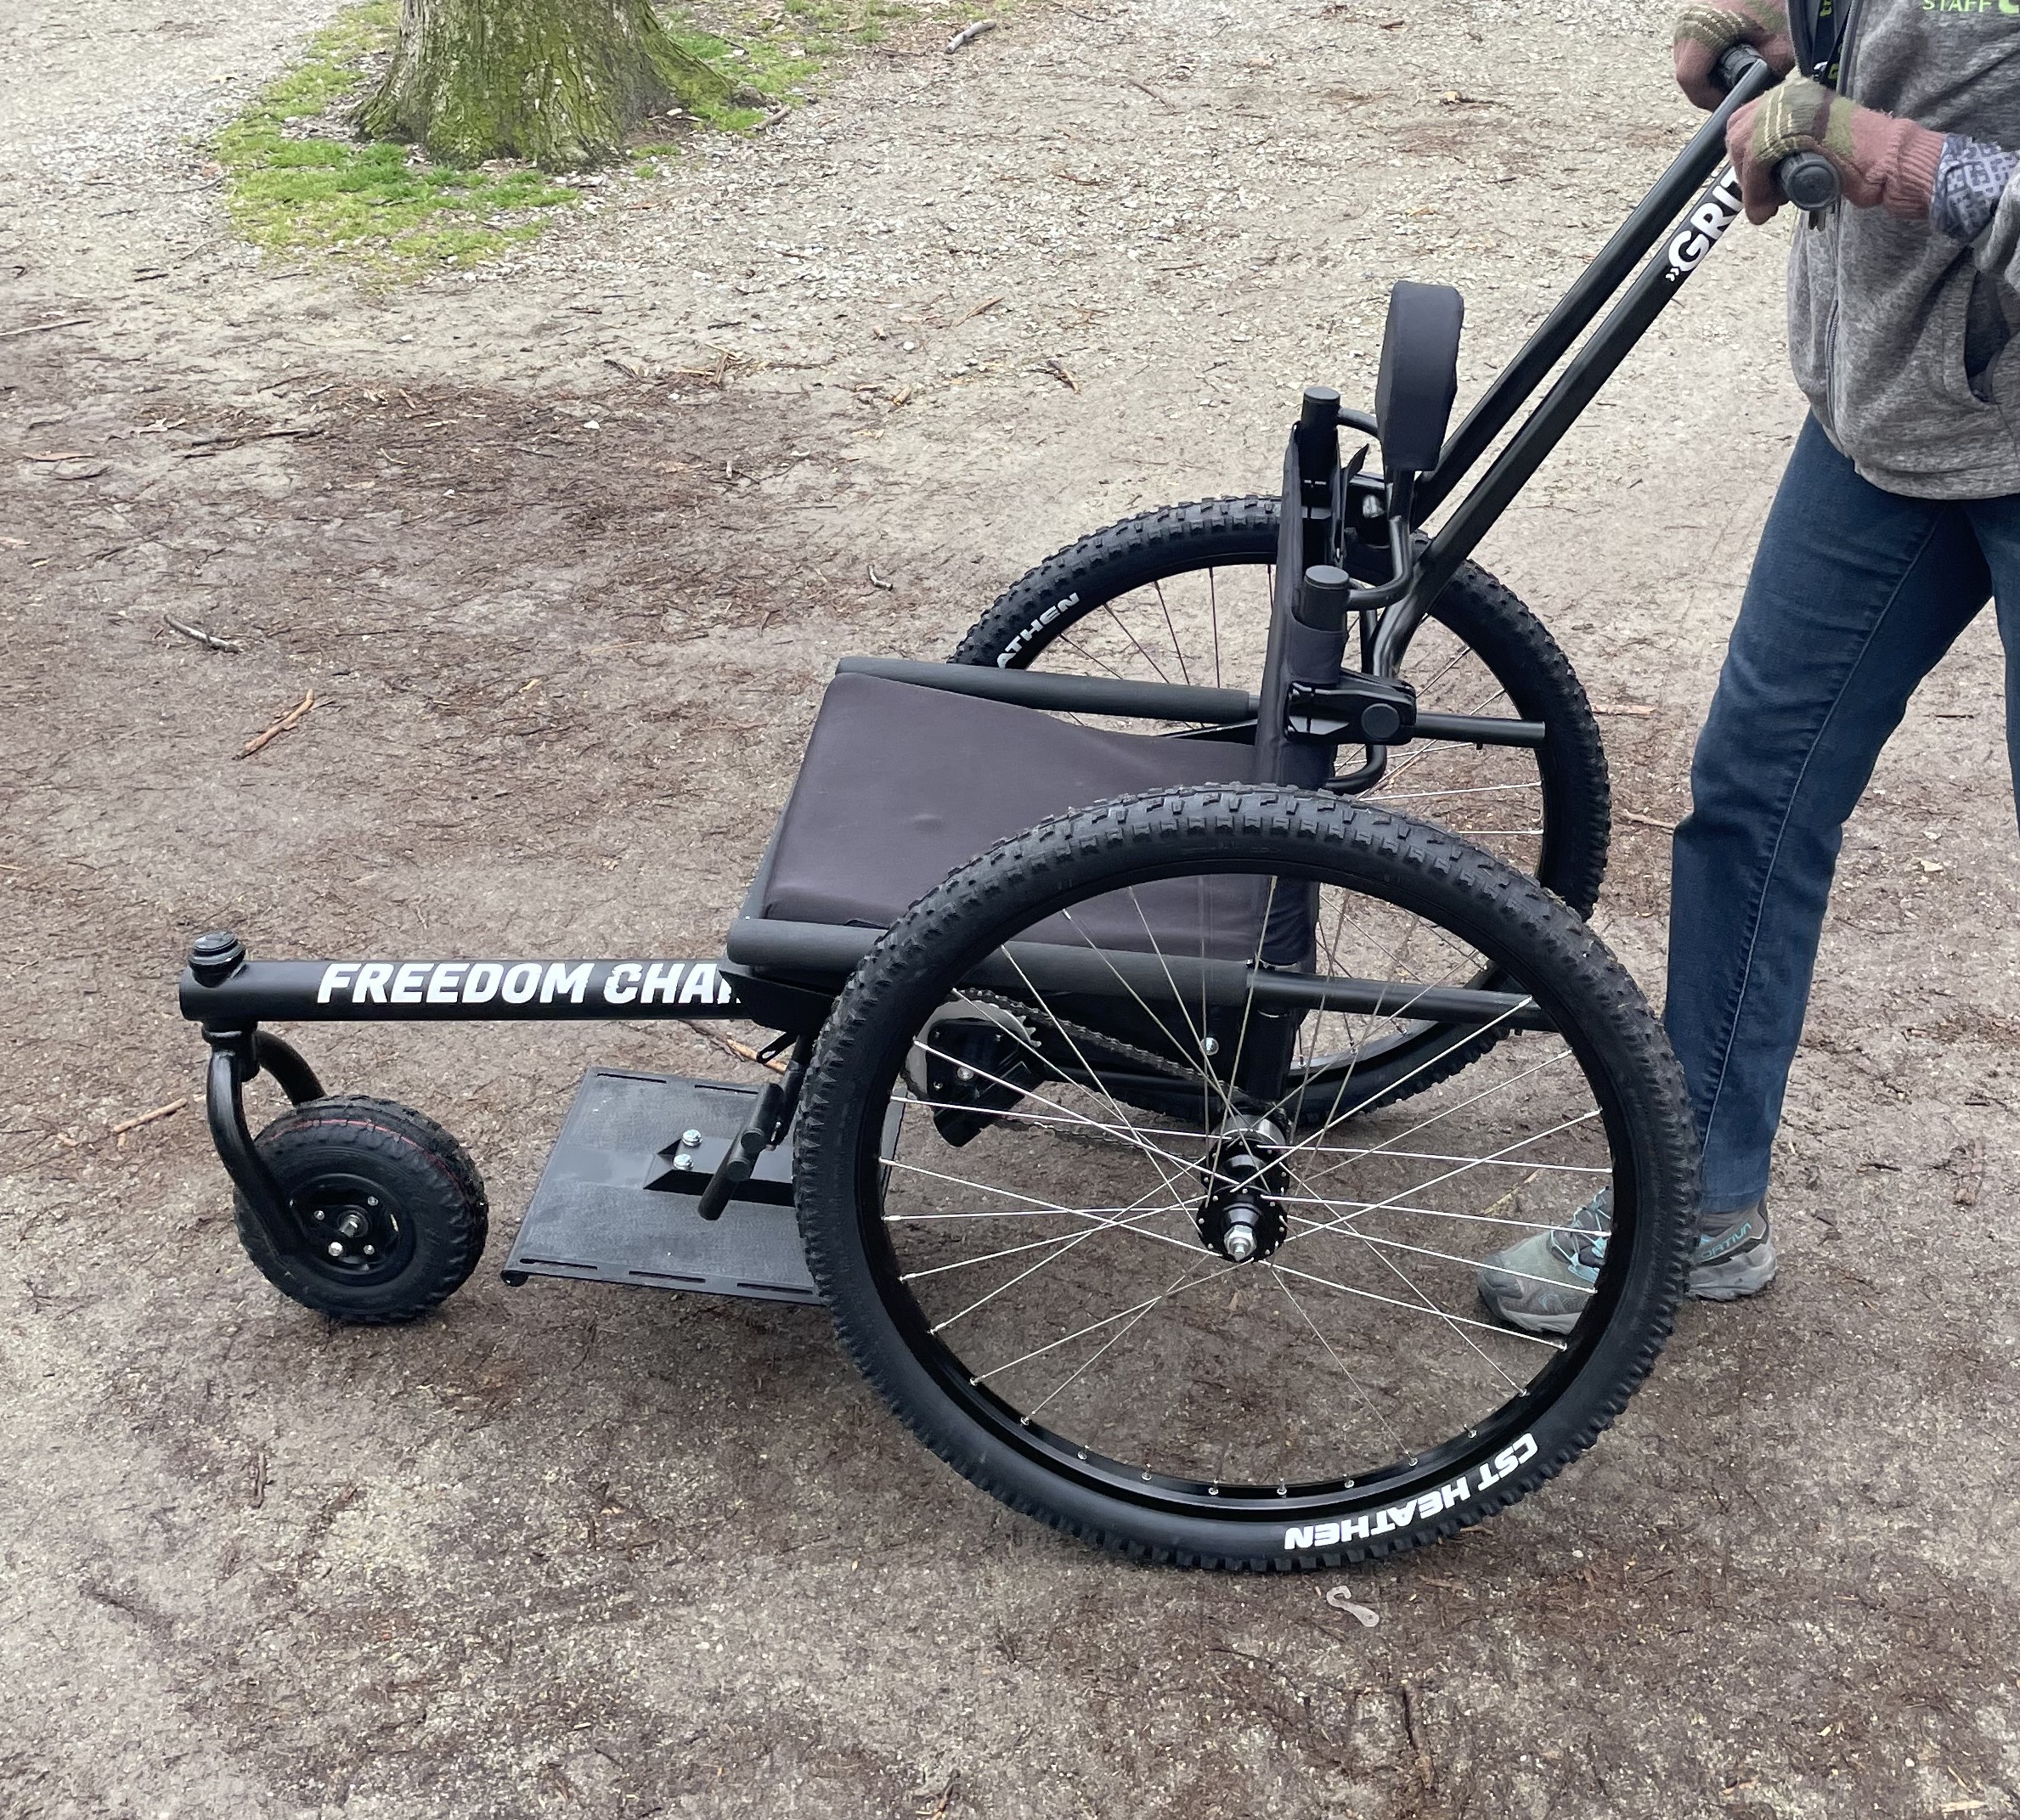 a GRIT wheelchair, designed to provide access to rugged terrain to people with mobility challenges